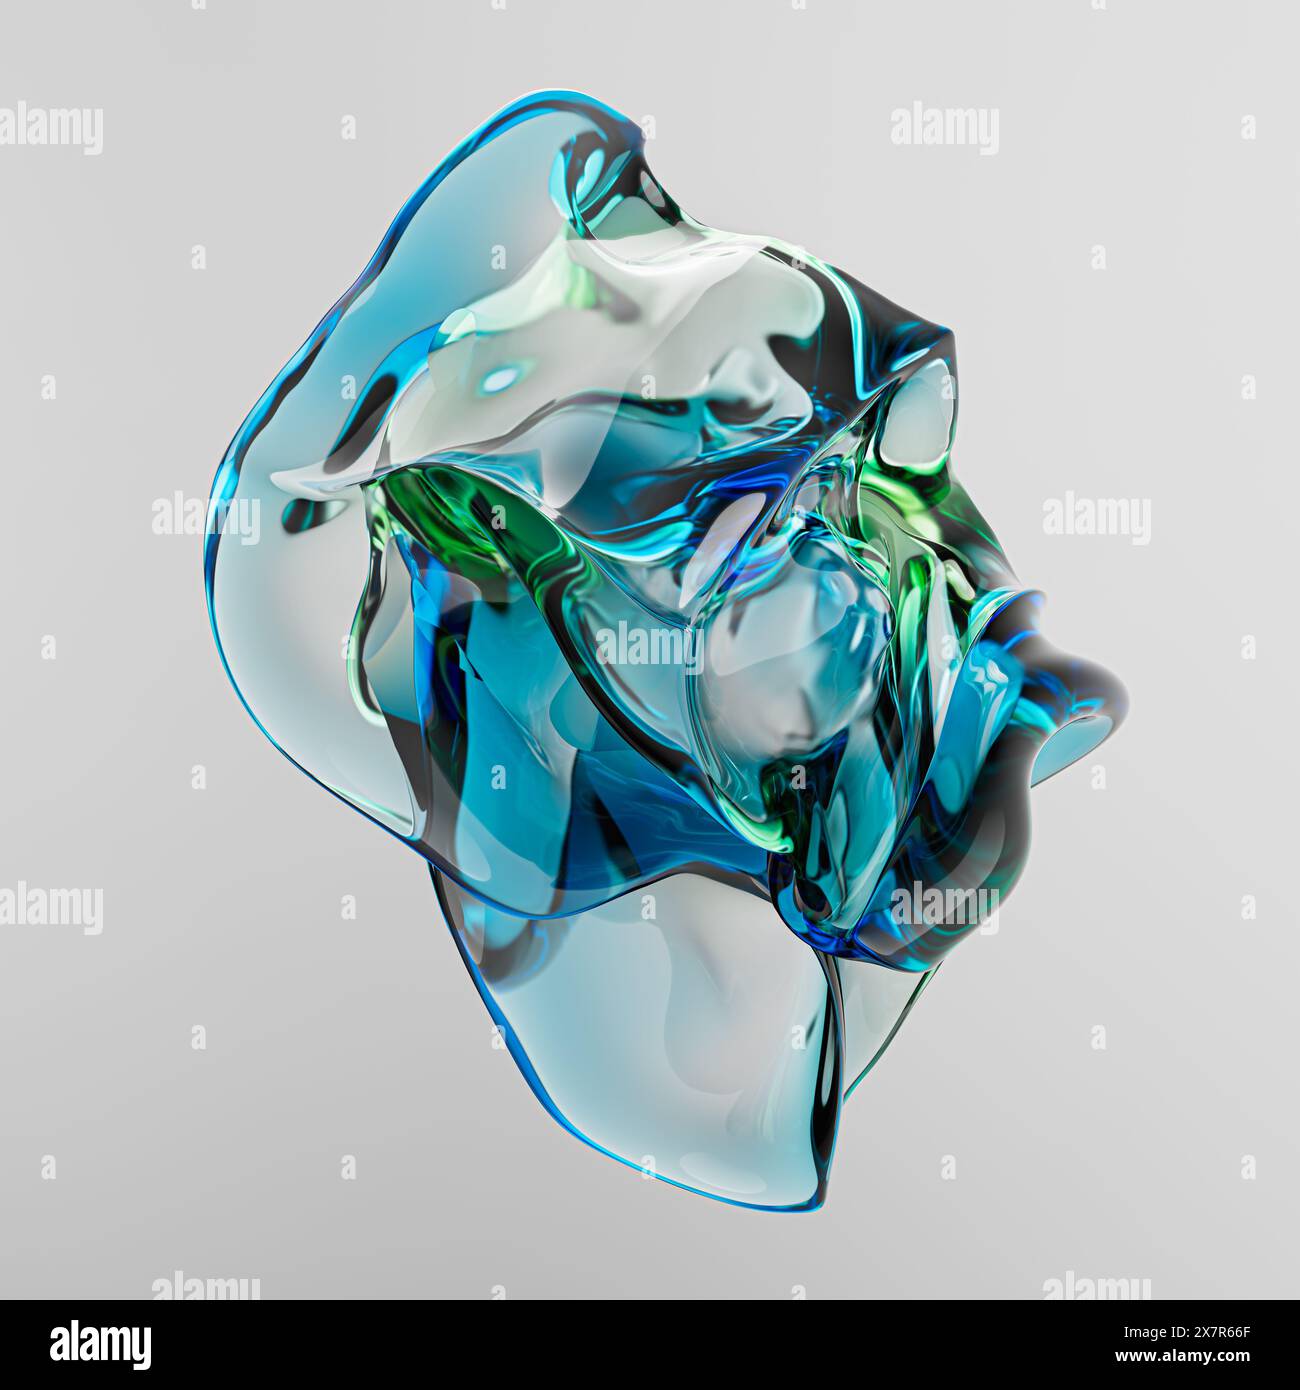 An intricate 3D render of glass with dynamic reflections and refractions in green and blue hues, set against a white background Ideal for modern desig Stock Photo